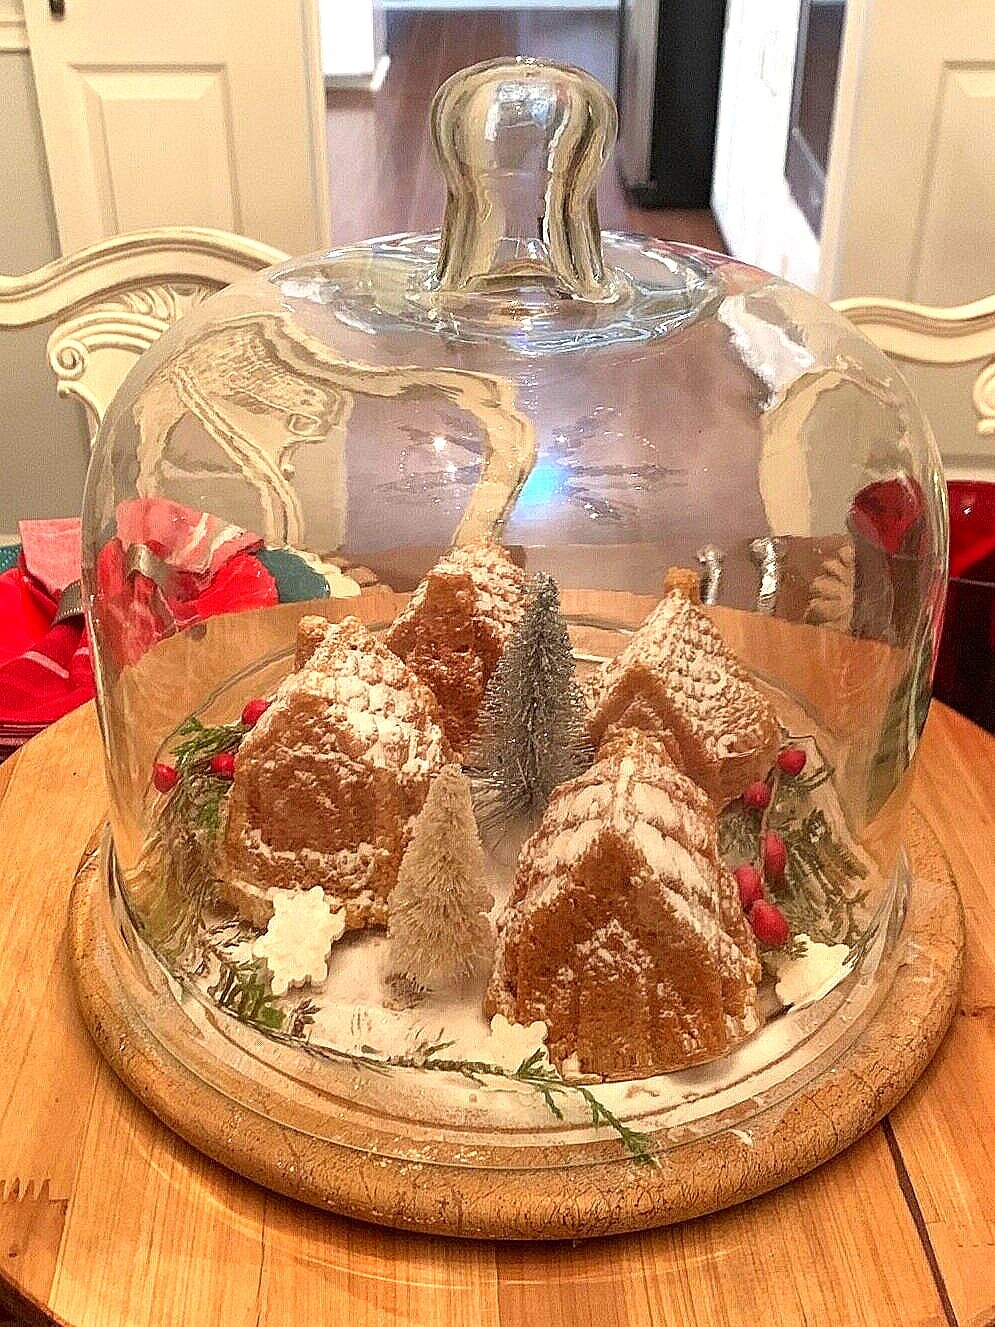 holiday spice cake village under glass dome on wooden plate